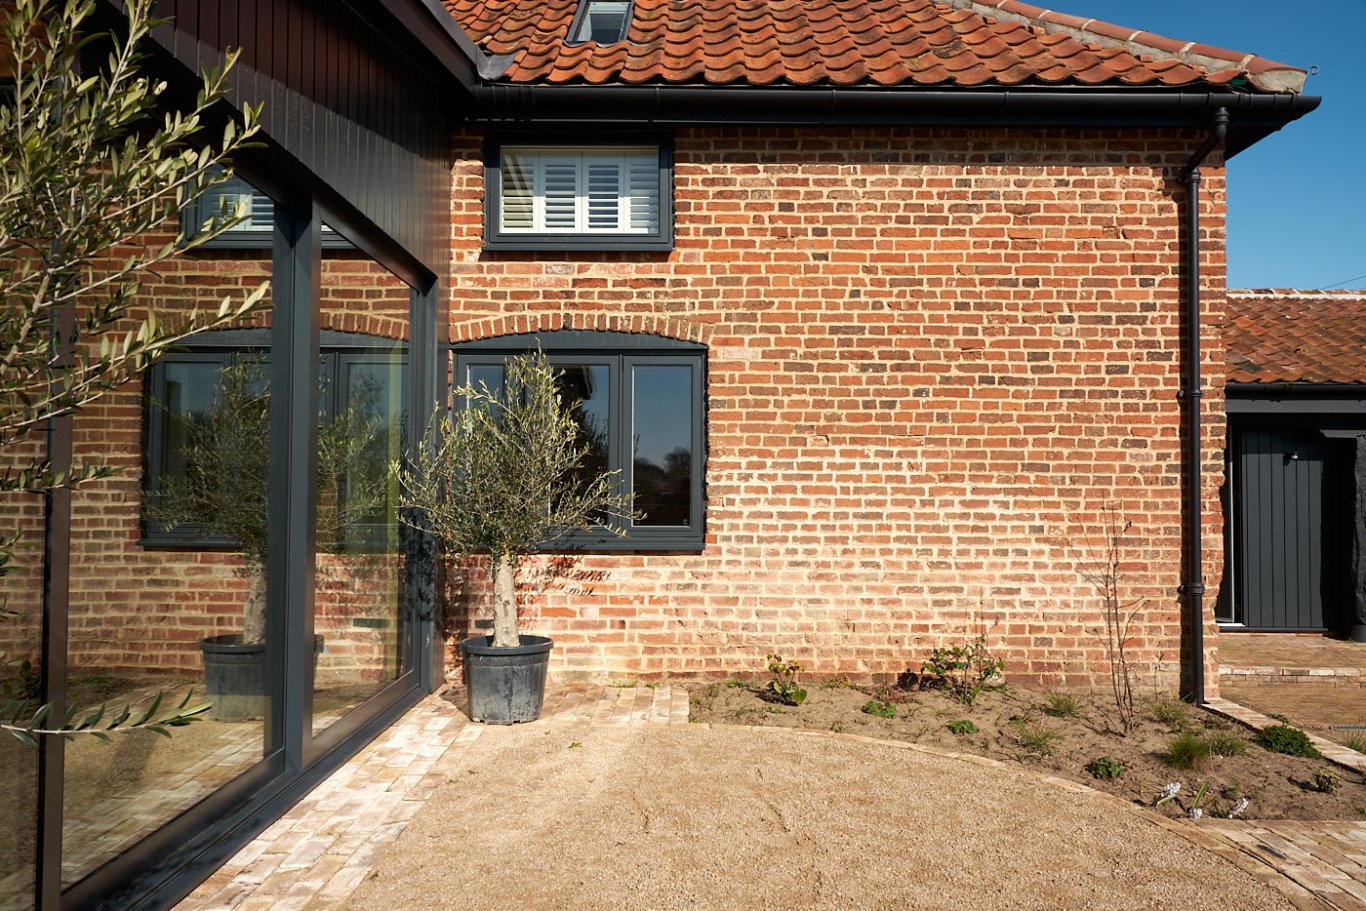 Red brick barn with red pantiles roof updated with modern double-glazed aluminium windows.